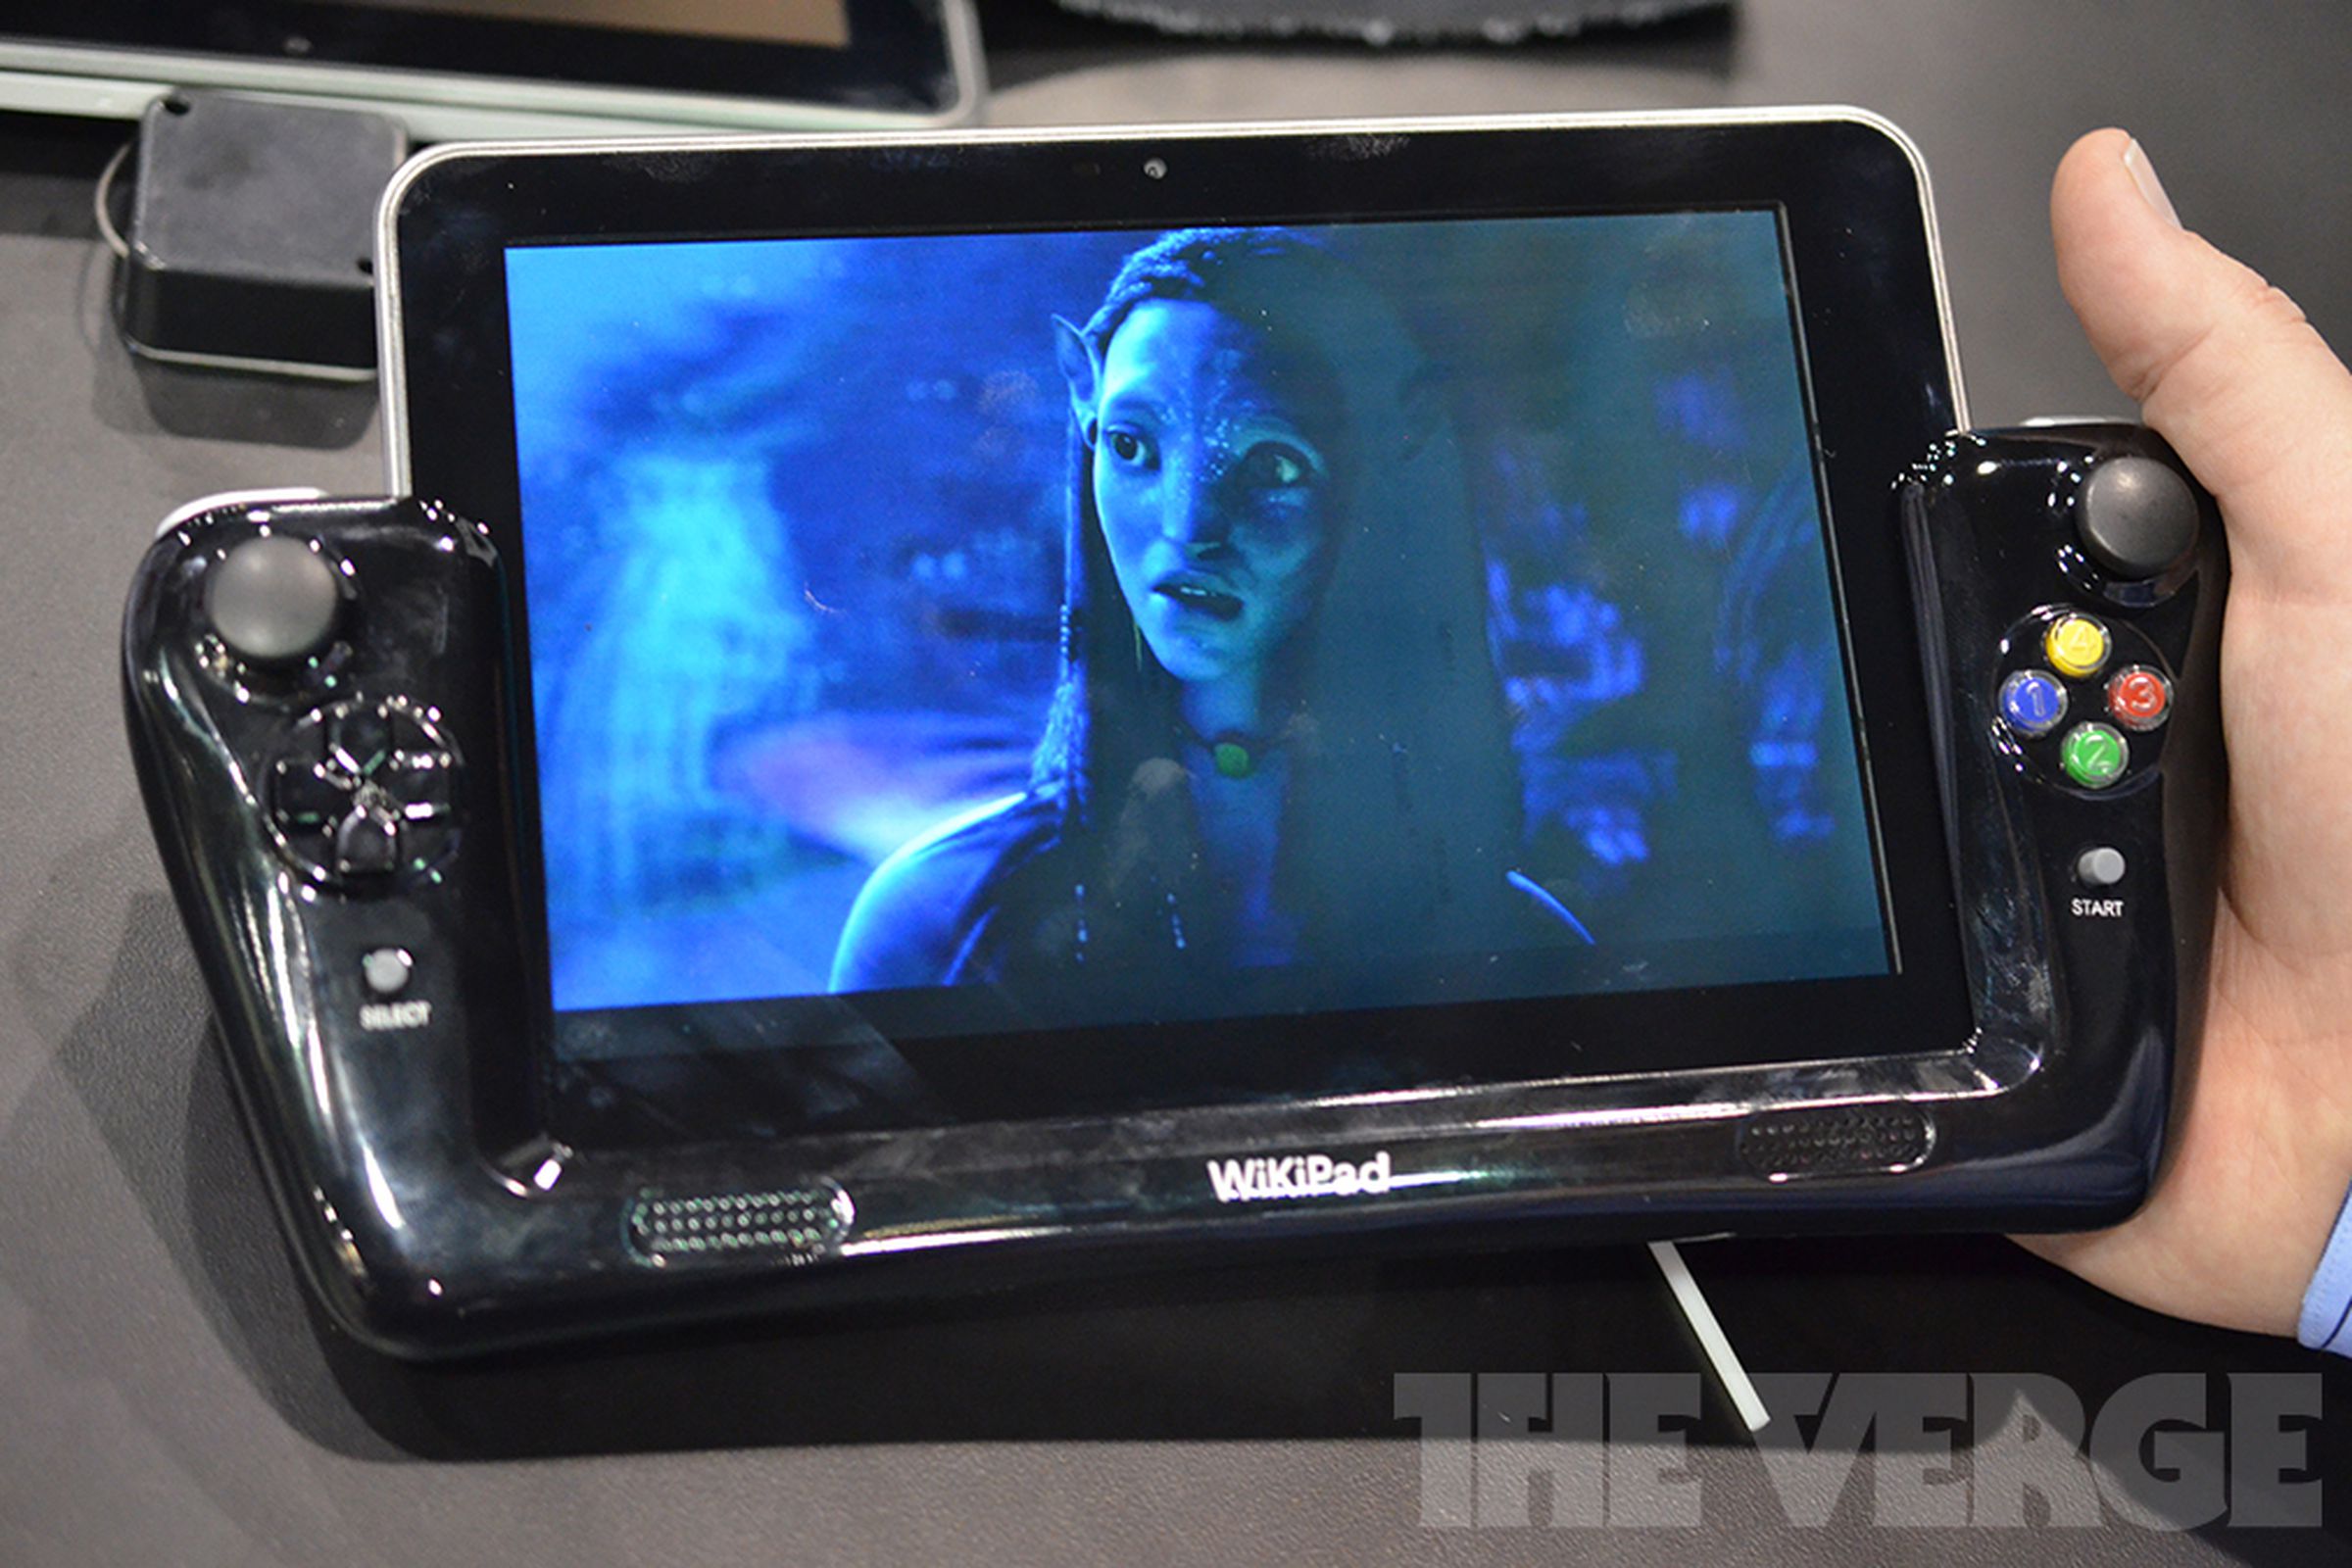 Gallery Photo: WikiPad:3D glasses-free Android 4.0 tablet developer kit (hands-on photos)